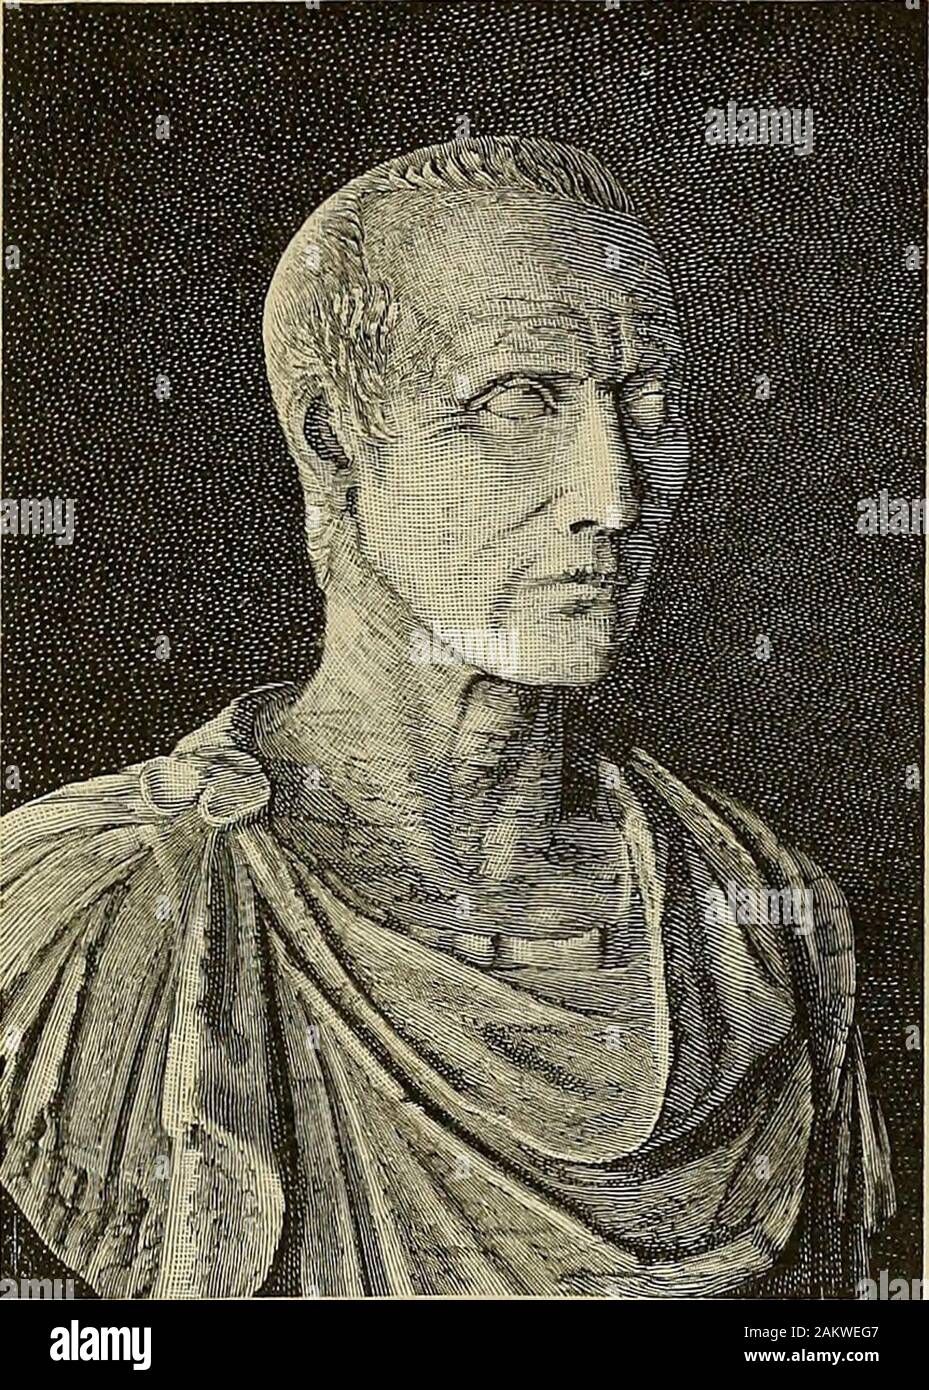 A brief history of the nations and of their progress in civilization . ior to hissojourn in Spain, byhis bold political con-duct, in opposition tothe Senate, and on thedemocratic side, he hadmade himself a favor-ite of the people. The First Triumvi-rate. — Pompeius wasdistrusted and fearedby the Senate; but, onseeing that he tookno measures to seizeon power at Rome, they proceeded to thwart his wishes, anddenied the expected allotments of land to his troops. Thecircumstances led to the formation of the first Triumvirate,which was an informal alliance between Pompeius, Caesar, andCrassus, again Stock Photo